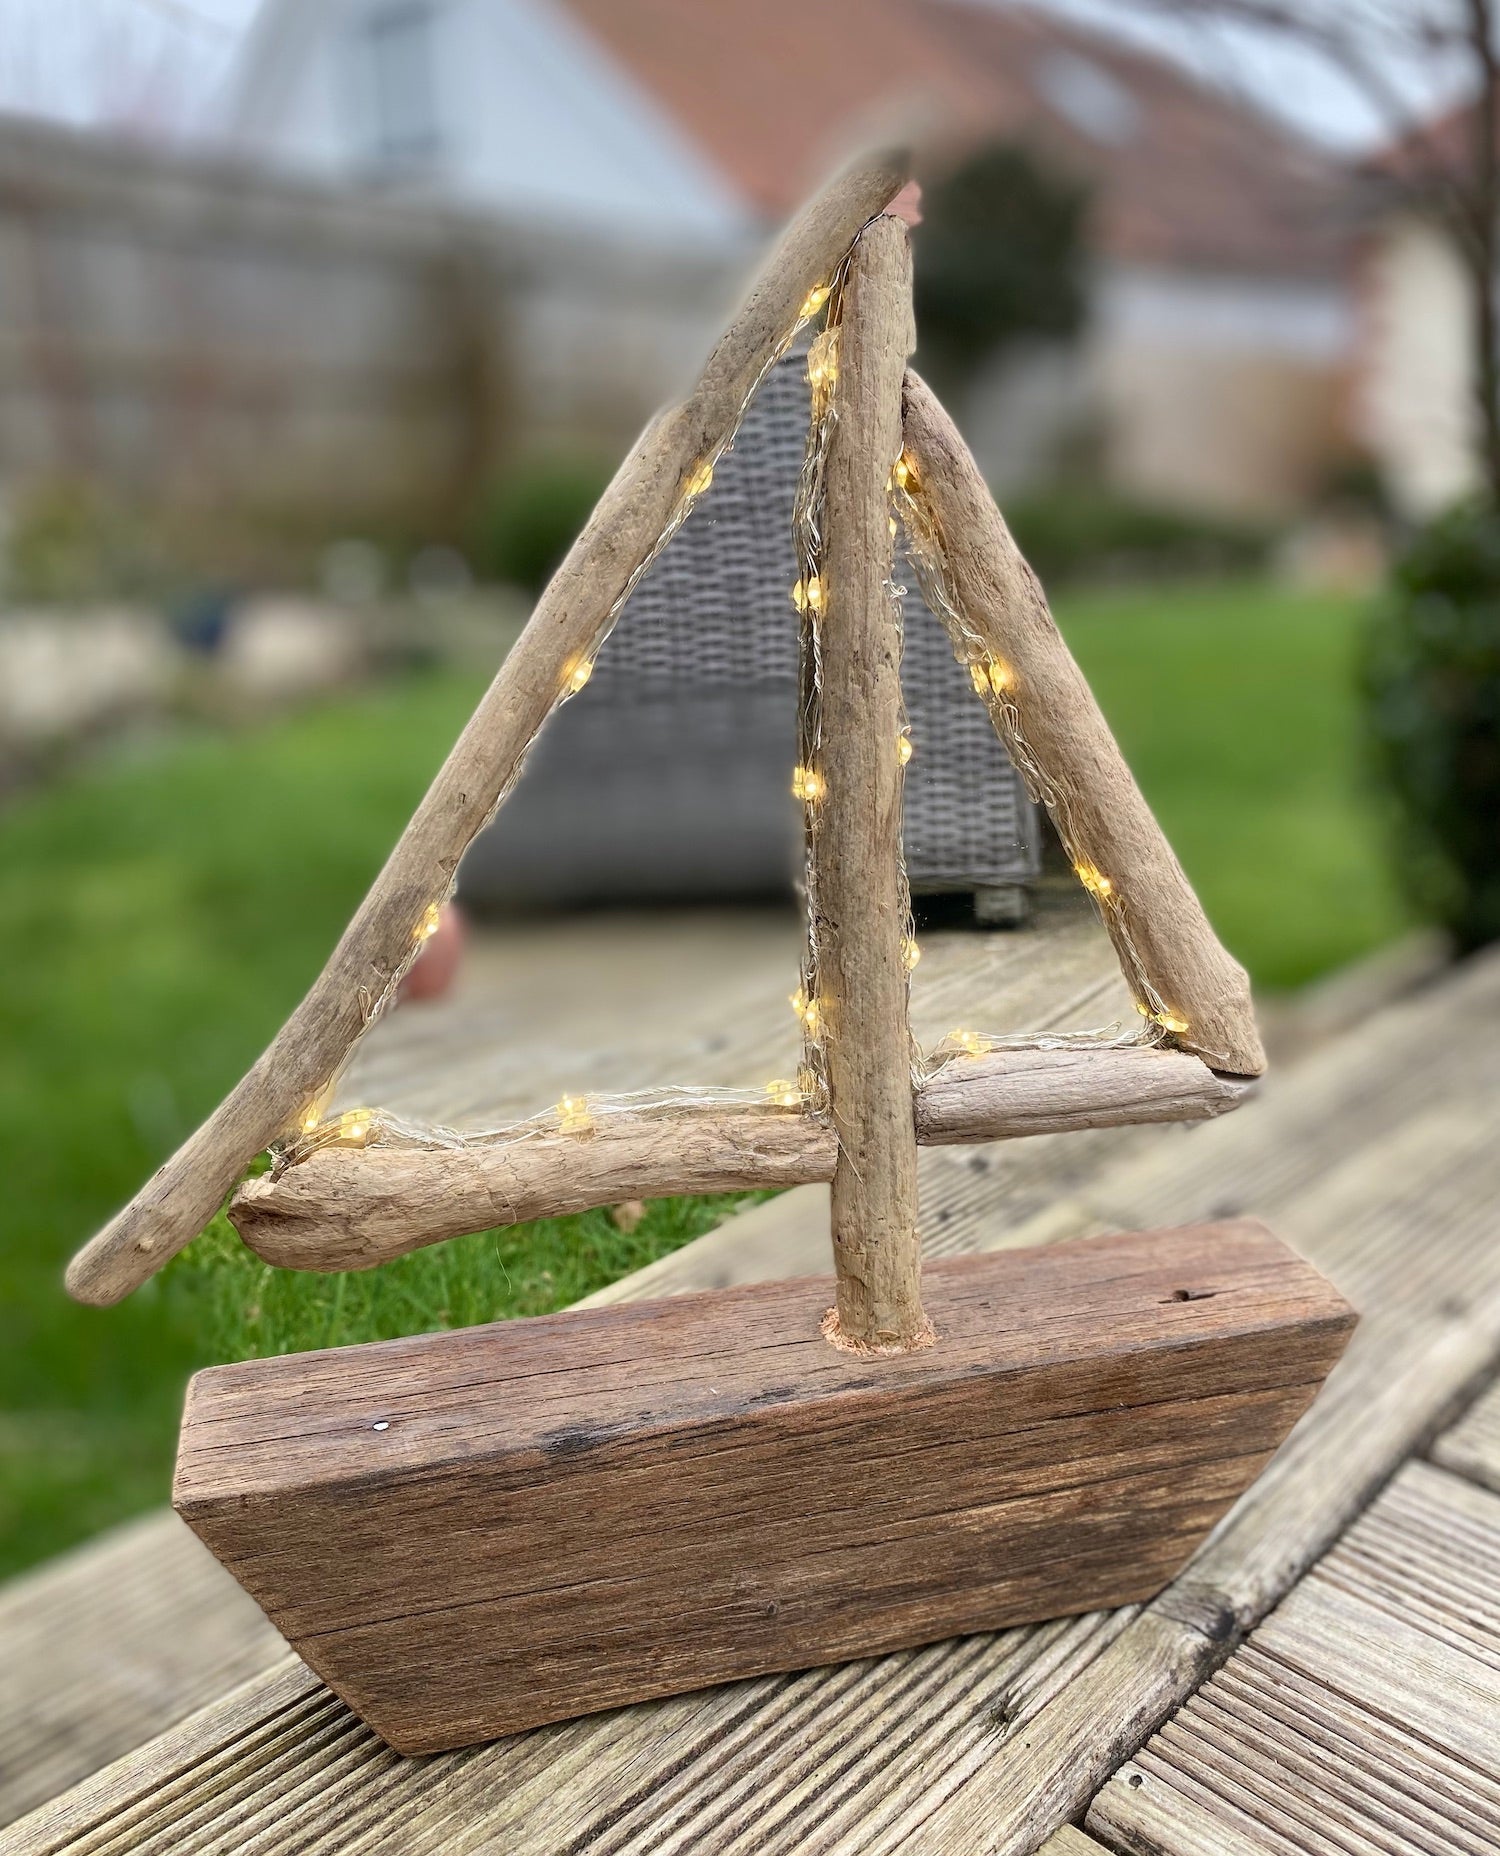 Driftwood Sailing Boat Mirror with Lights - Drift Craft by Jo